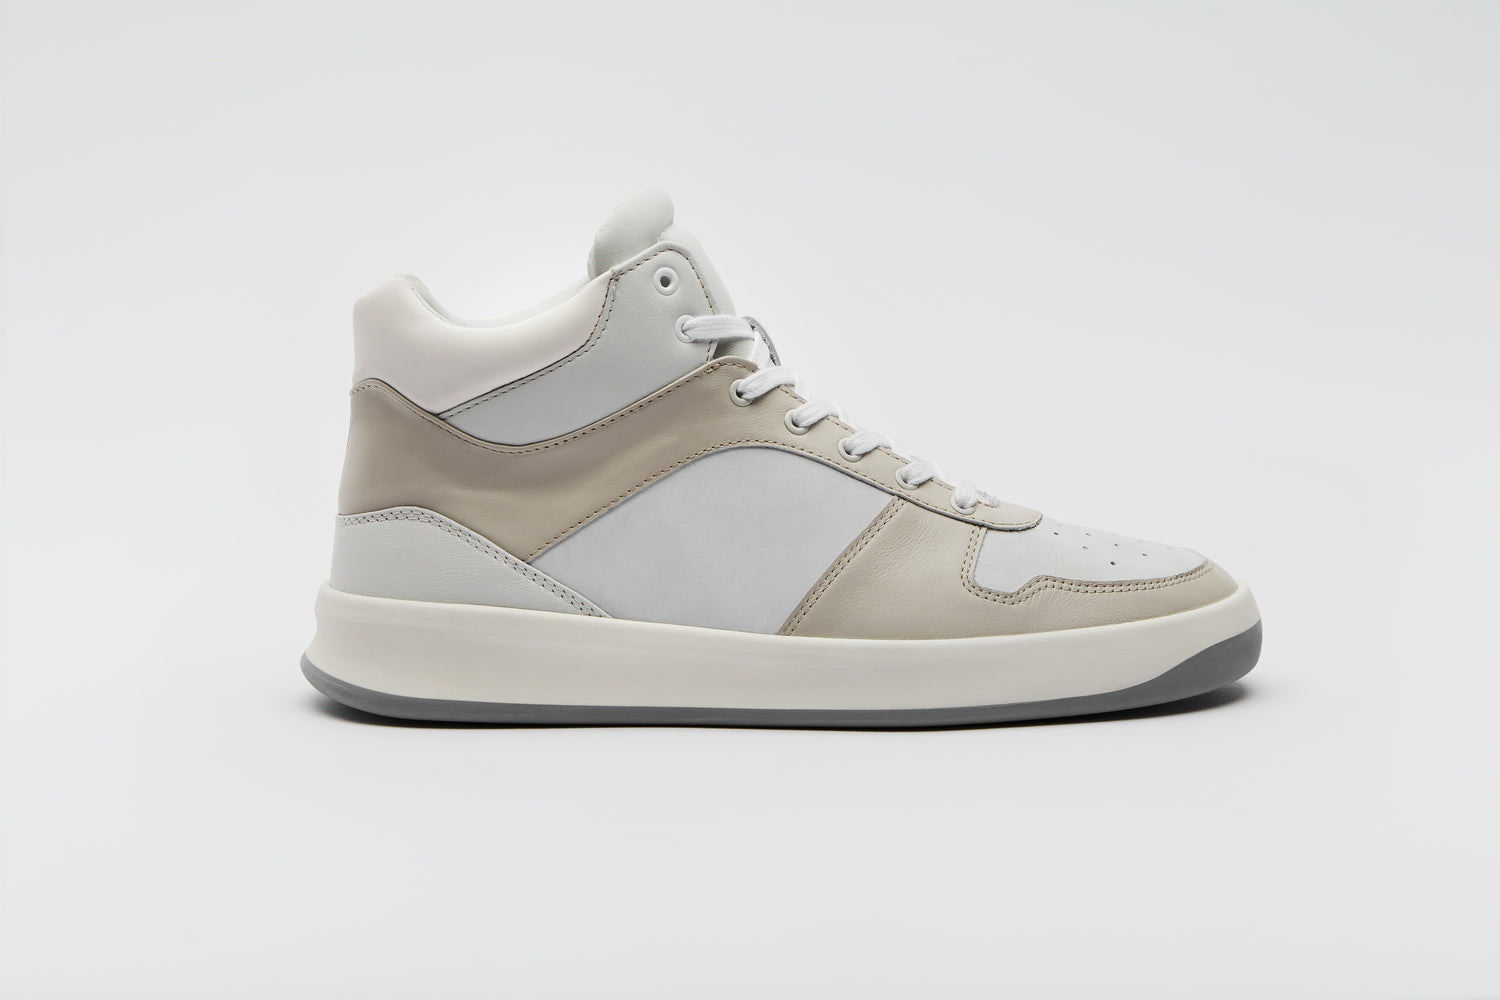 Premium white and off-white sneaker with a calfskin leather lining.